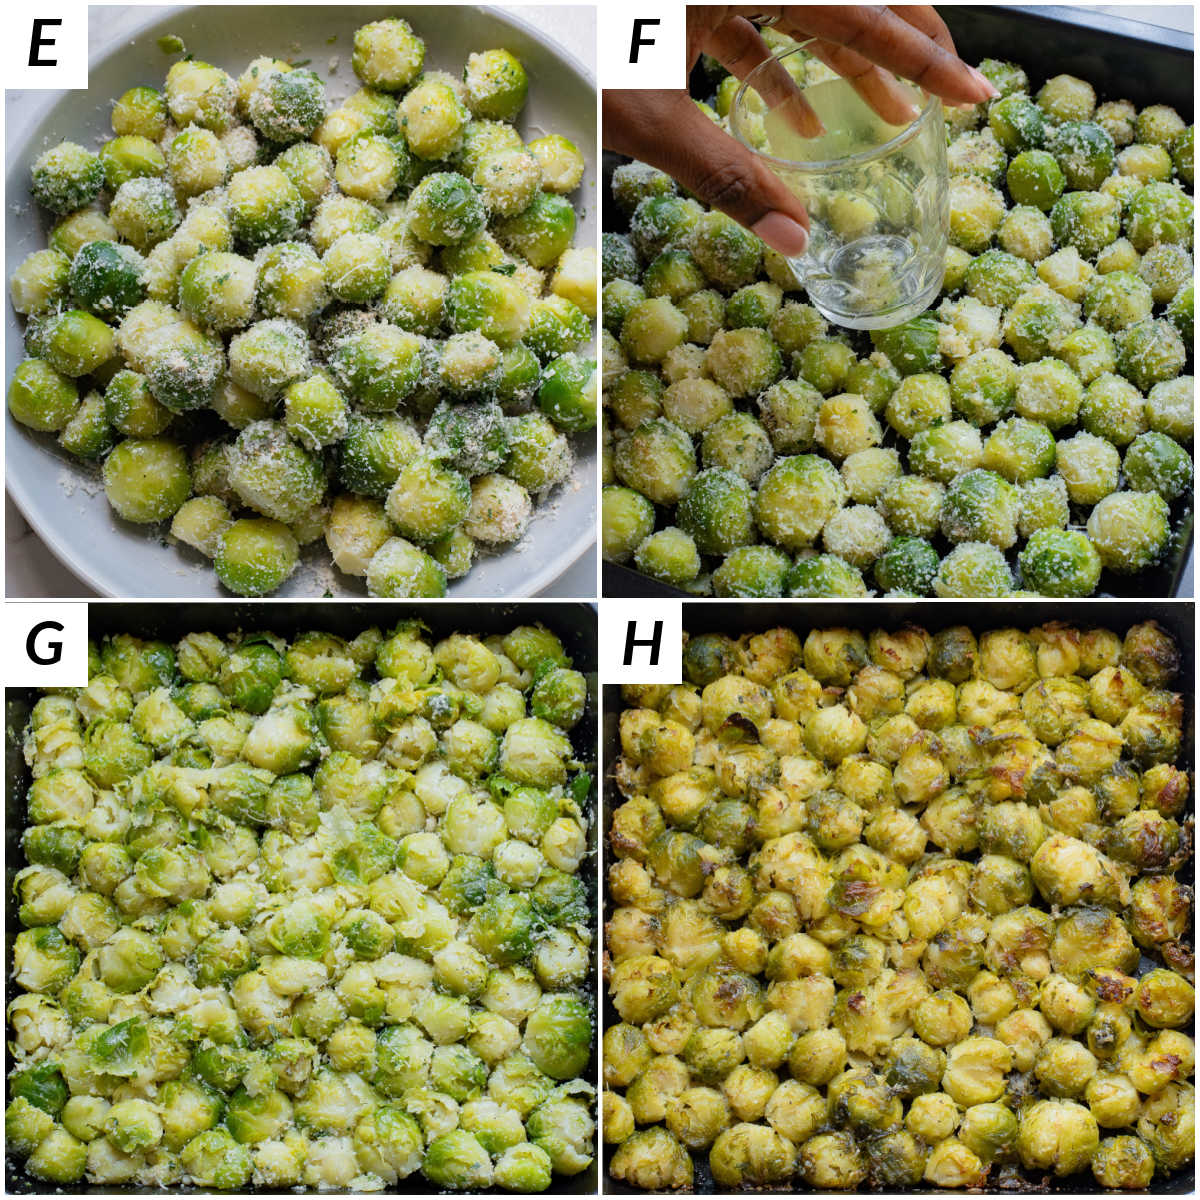 image collage showing the final steps for making smashed brussel sprouts